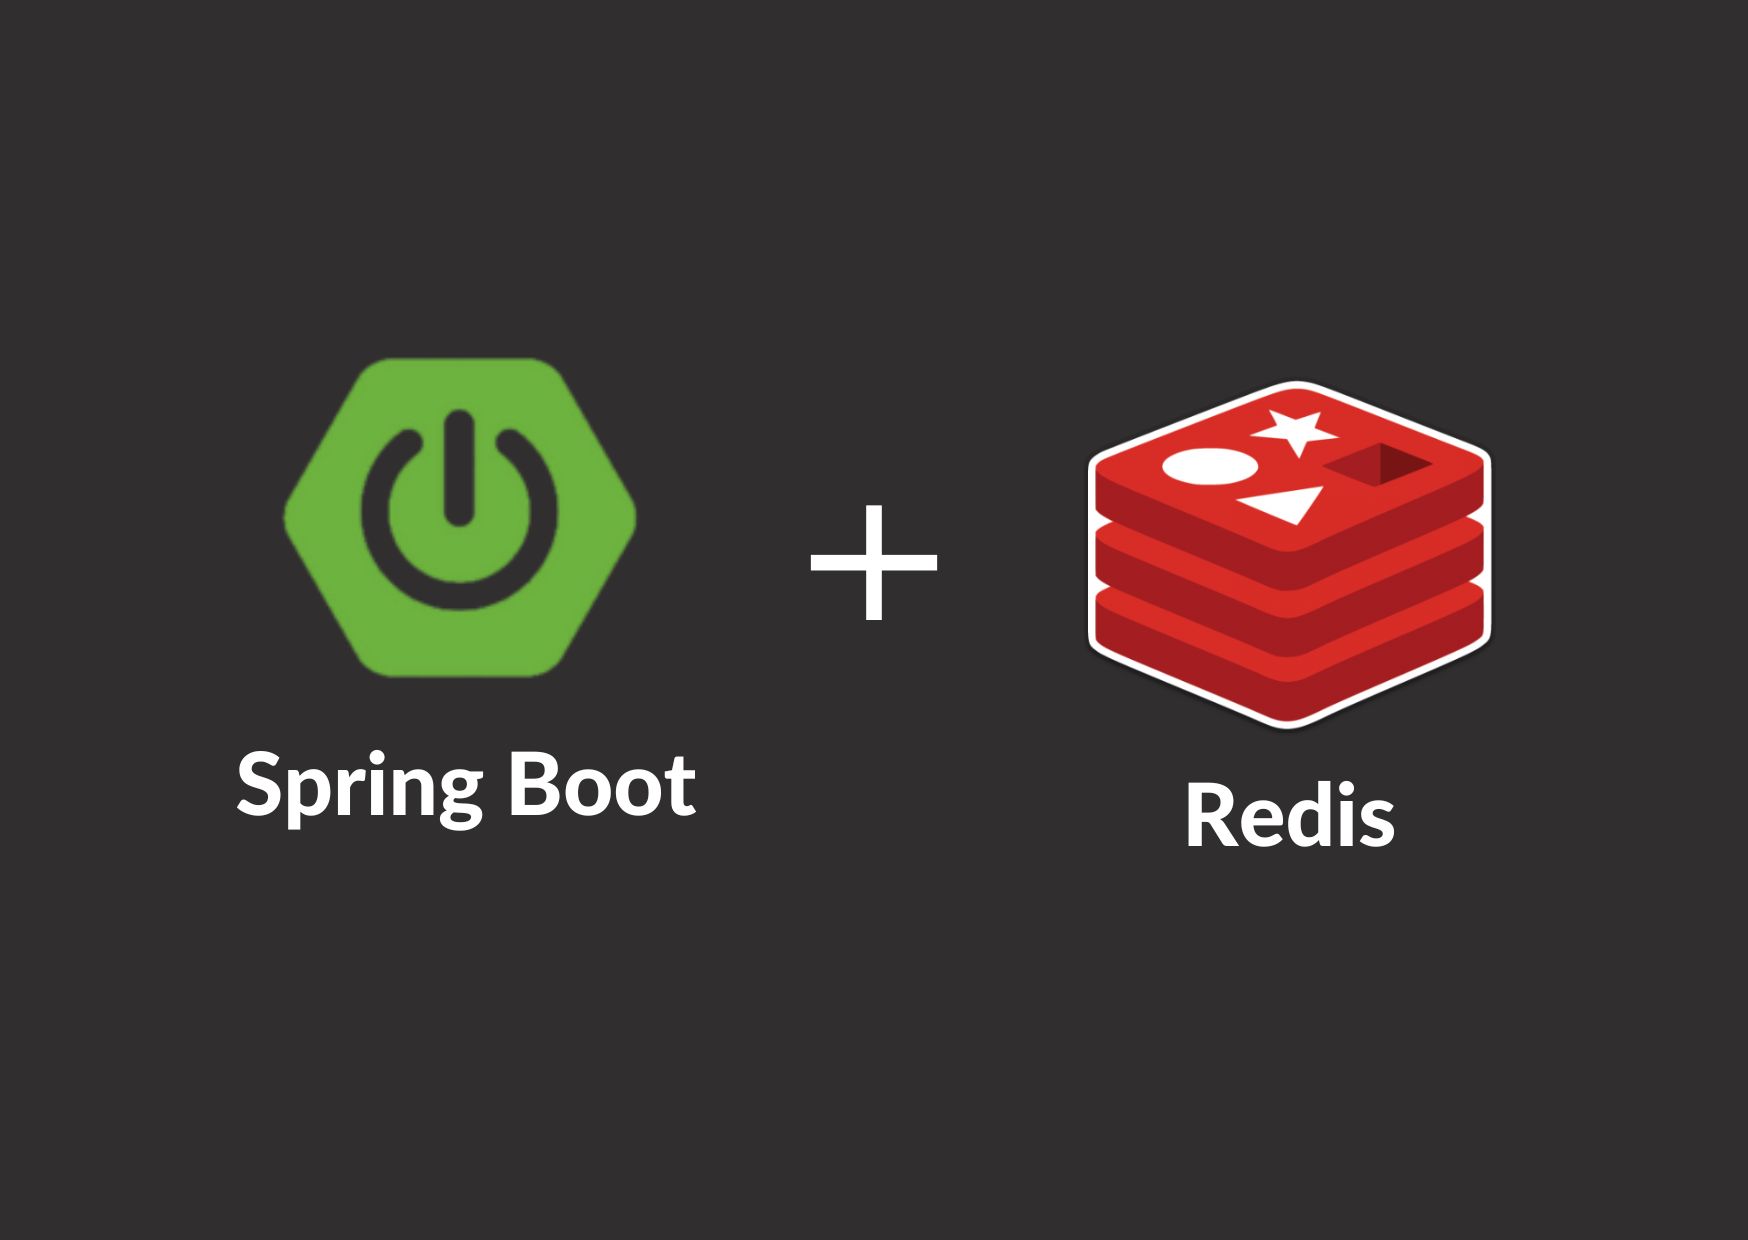 How to Search & Query Redis with A Spring Boot Application